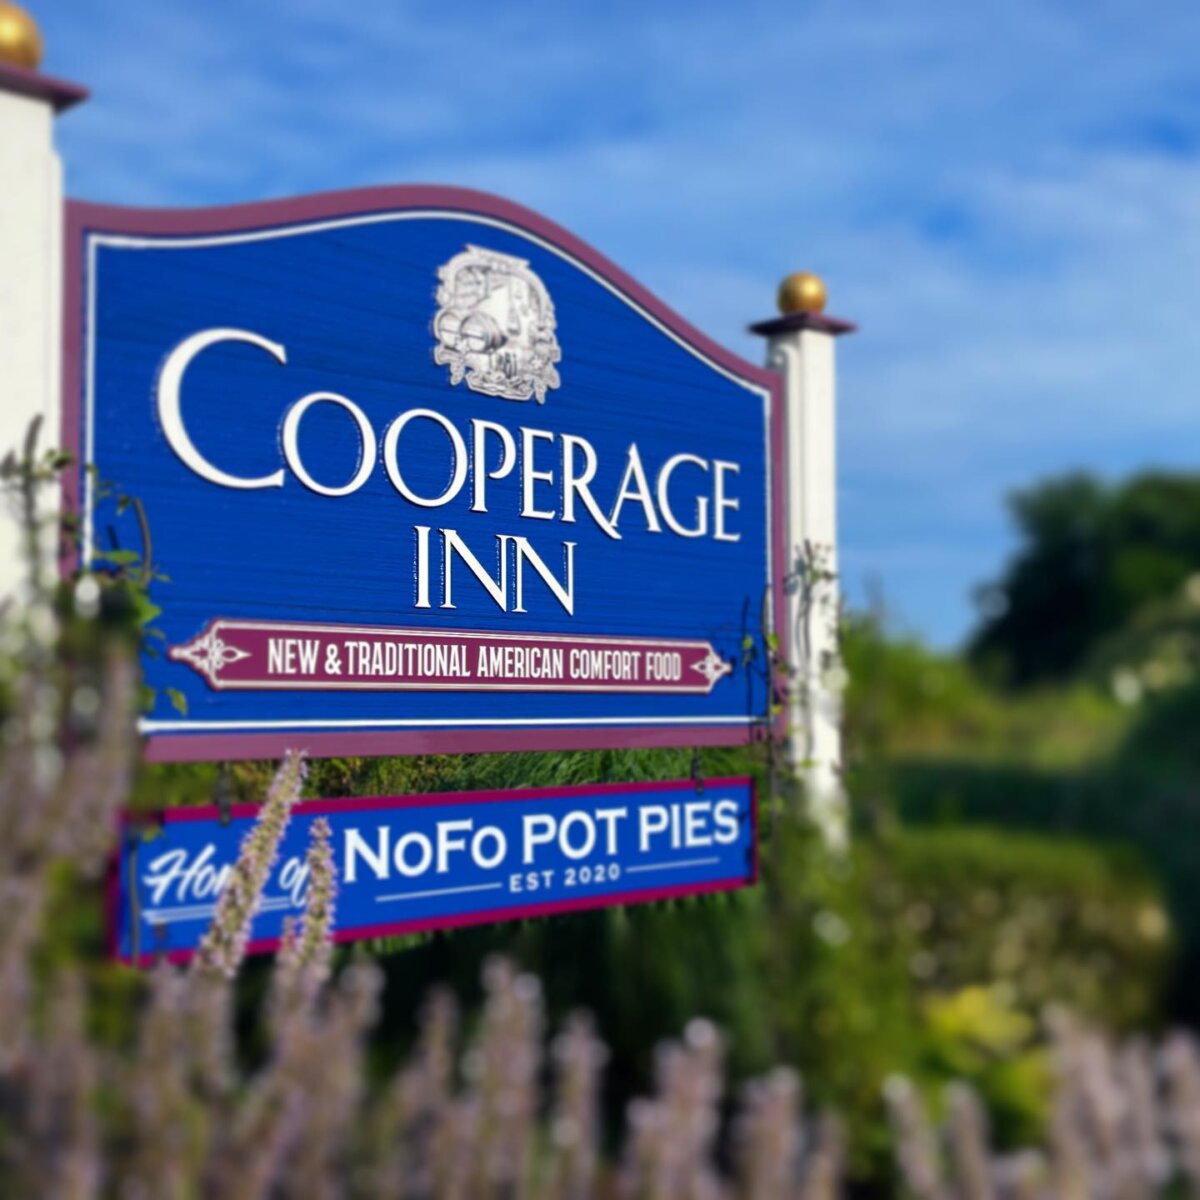 The sign welcoming all to Cooperage Inn and NoFo Pot Pies